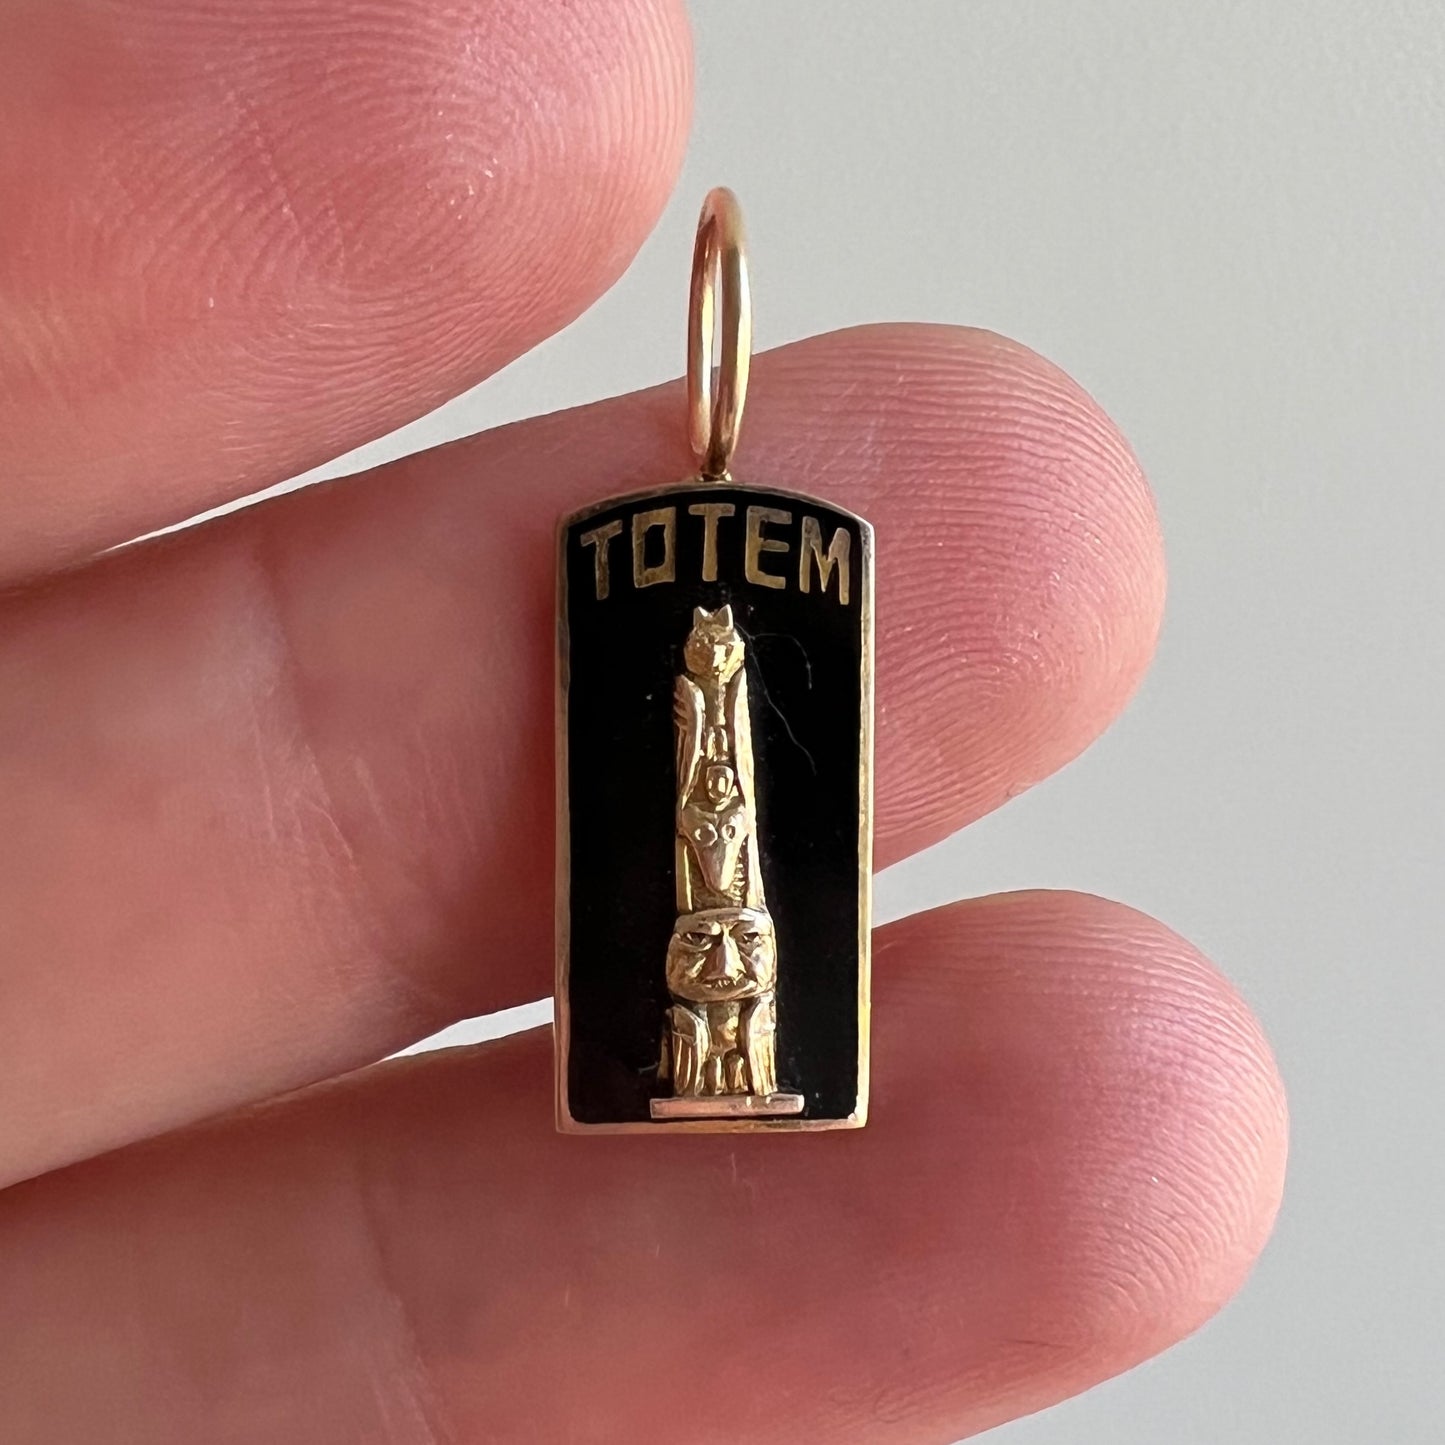 reimagined V I N T A G E // tiniest totem / 10k yellow gold and enamel TOTEM sorority pin conversion / a pendant